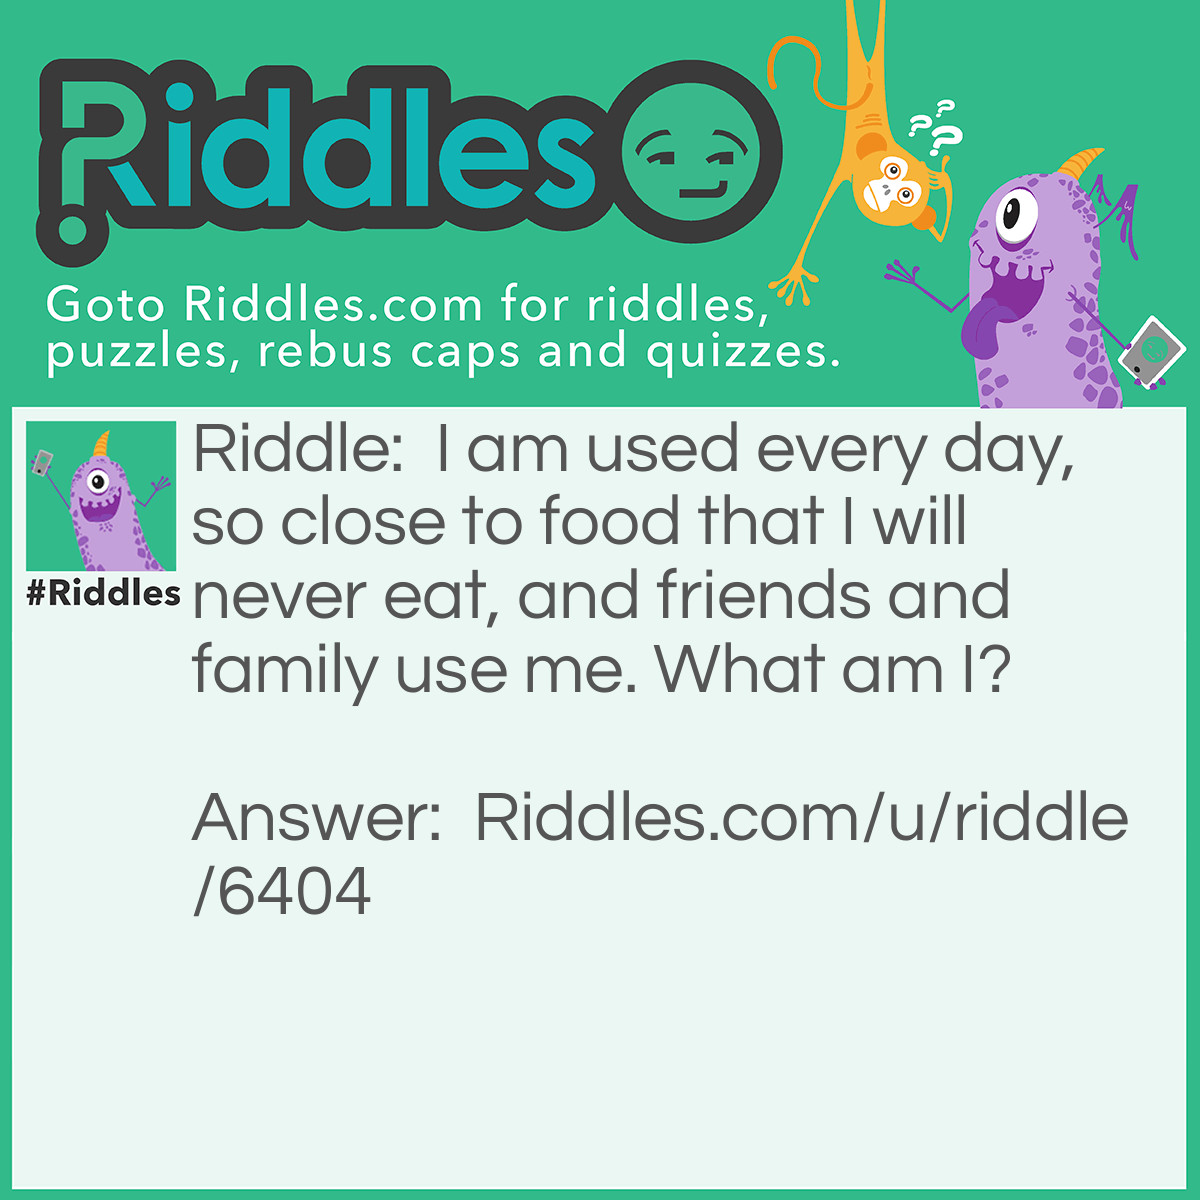 Riddle: I am used every day, so close to food that I will never eat, and friends and family use me. What am I? Answer: Table.